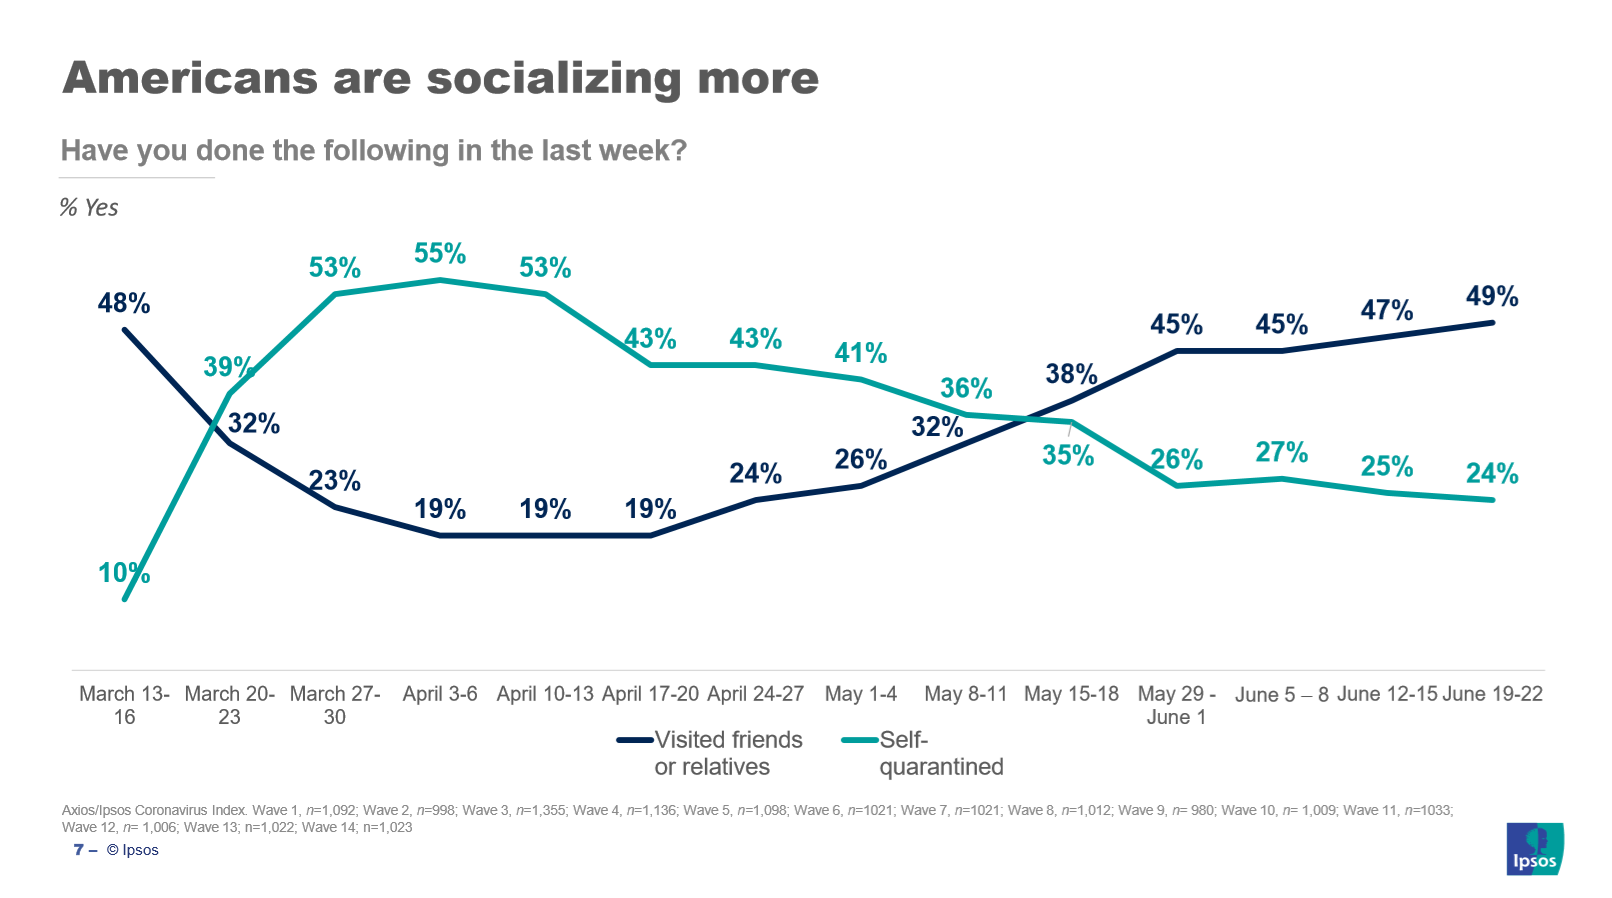 Americans socializing more